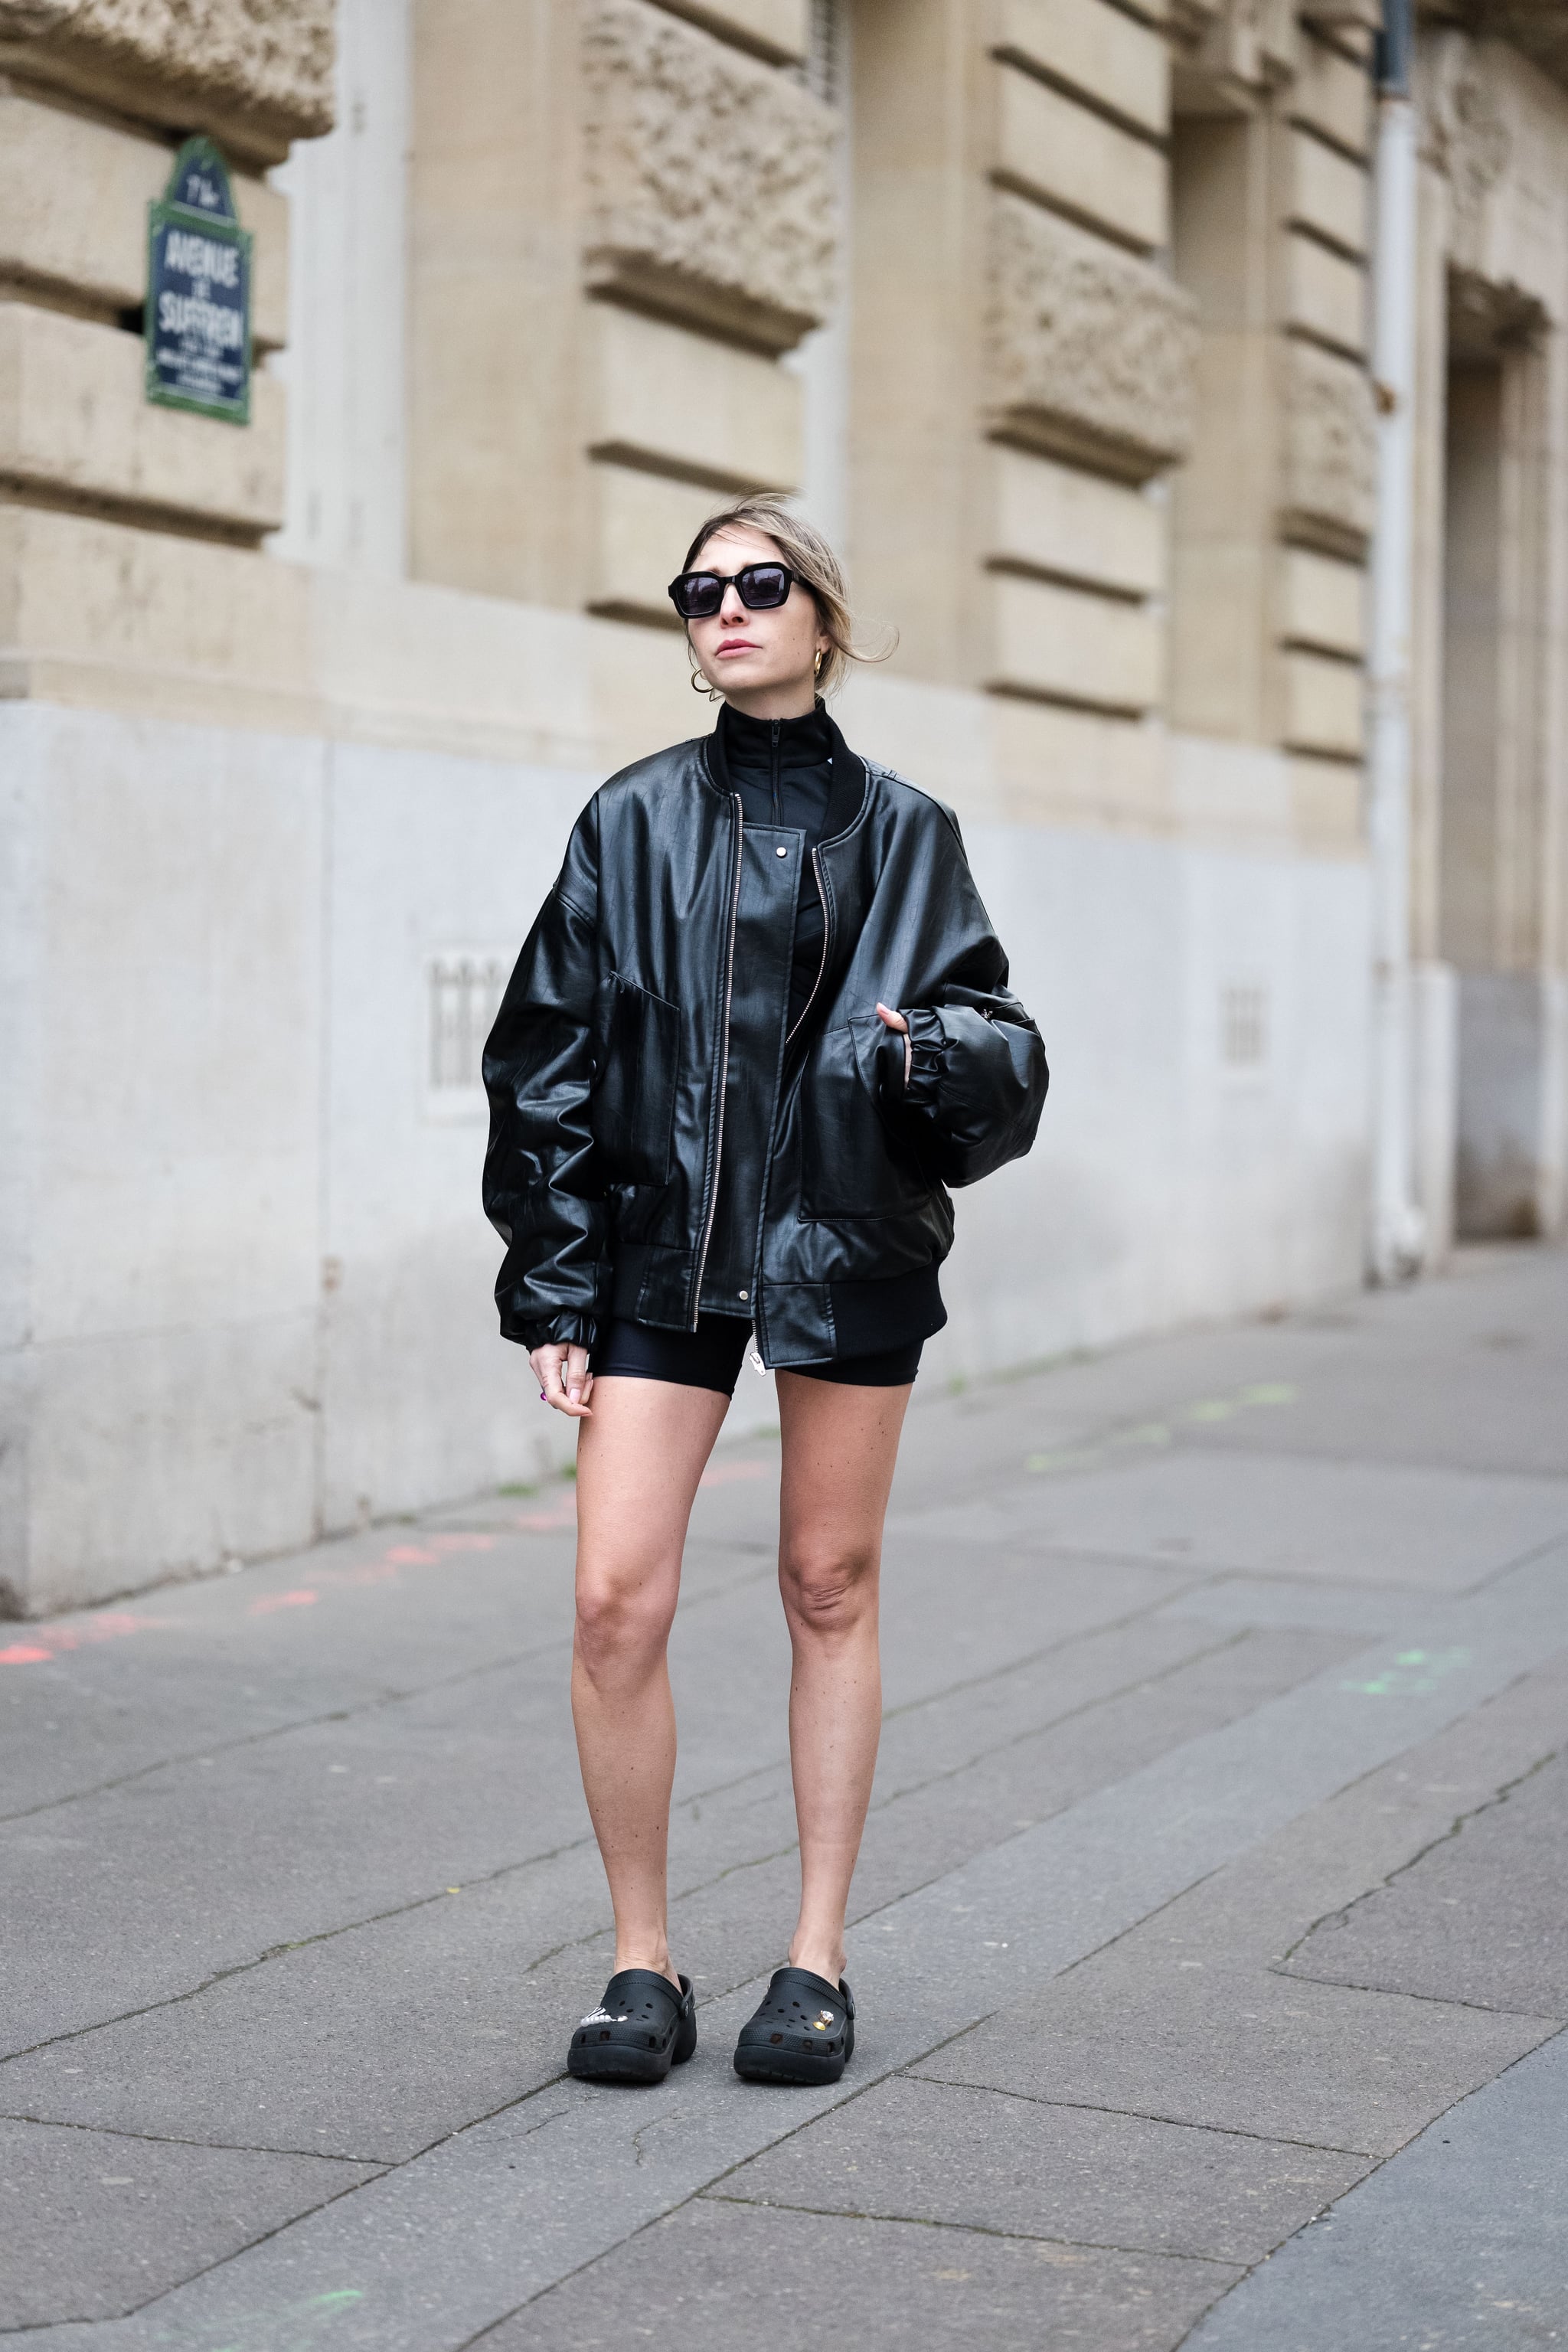 Black Leather Bike Shorts with Leather Shorts Outfits (2 ideas & outfits)